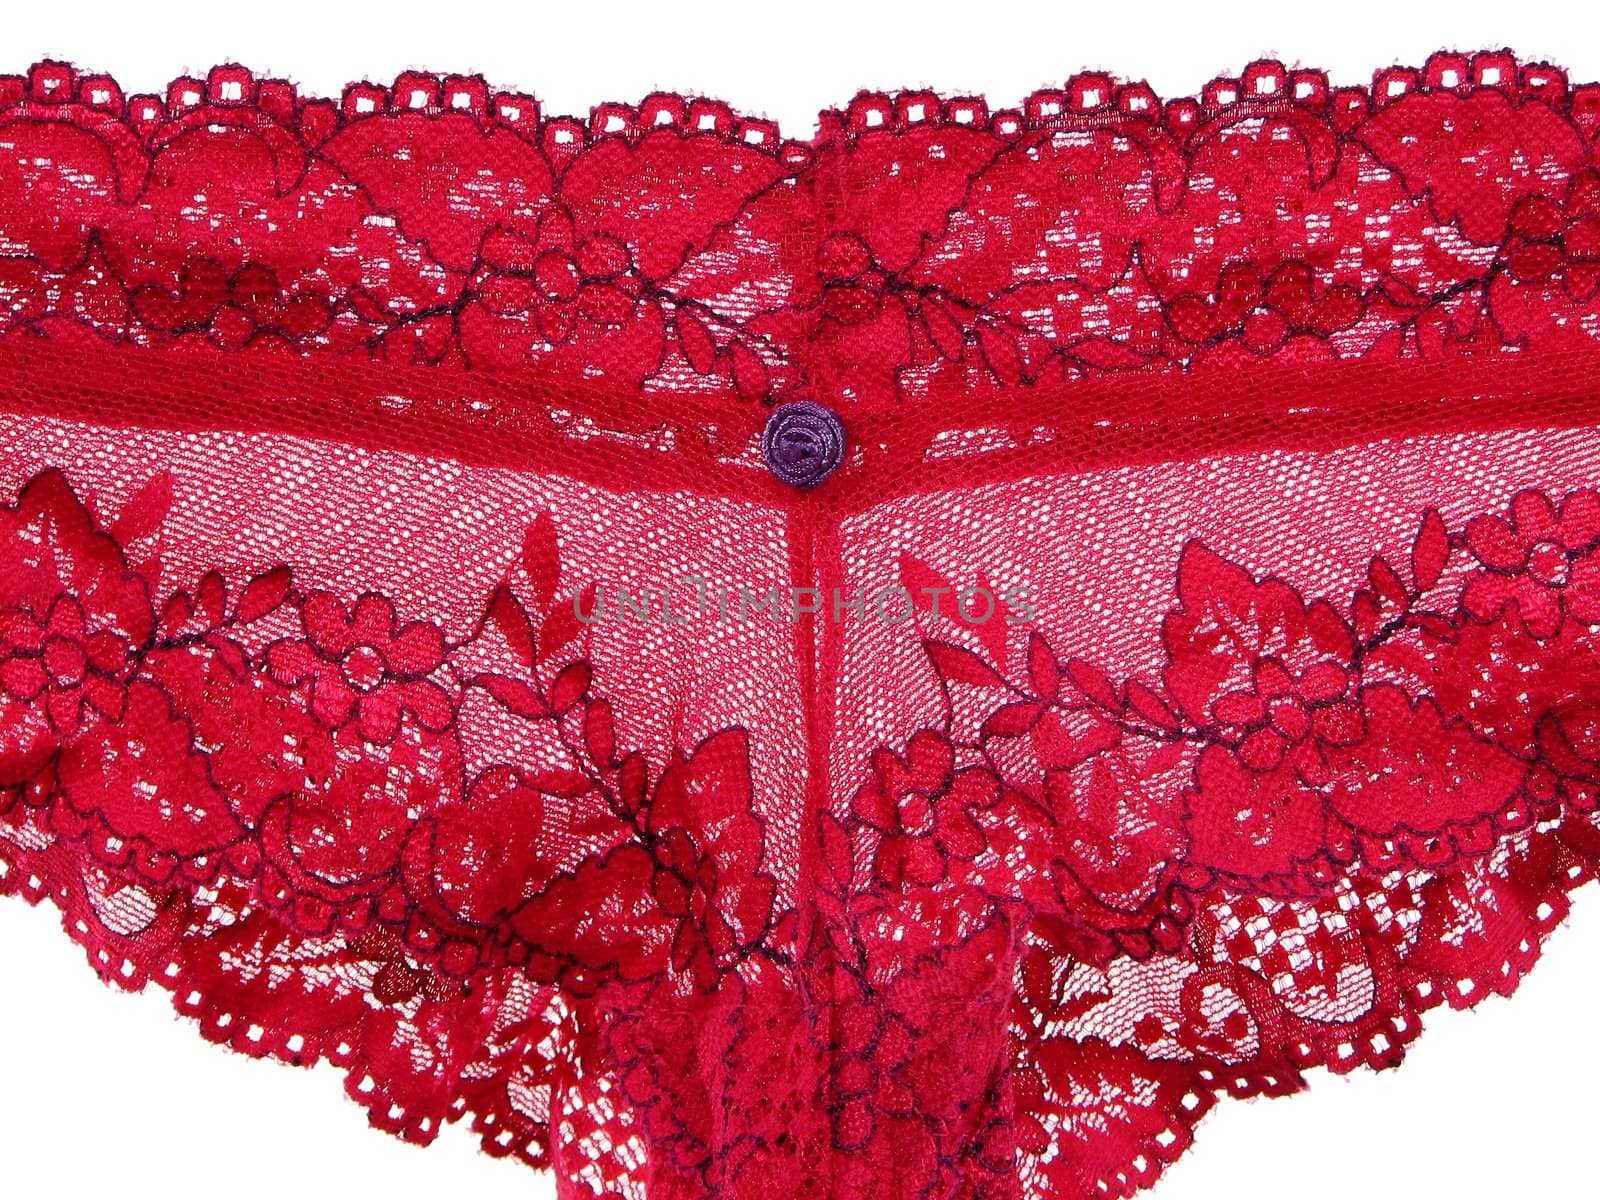 Red lacy lingerie by anikasalsera